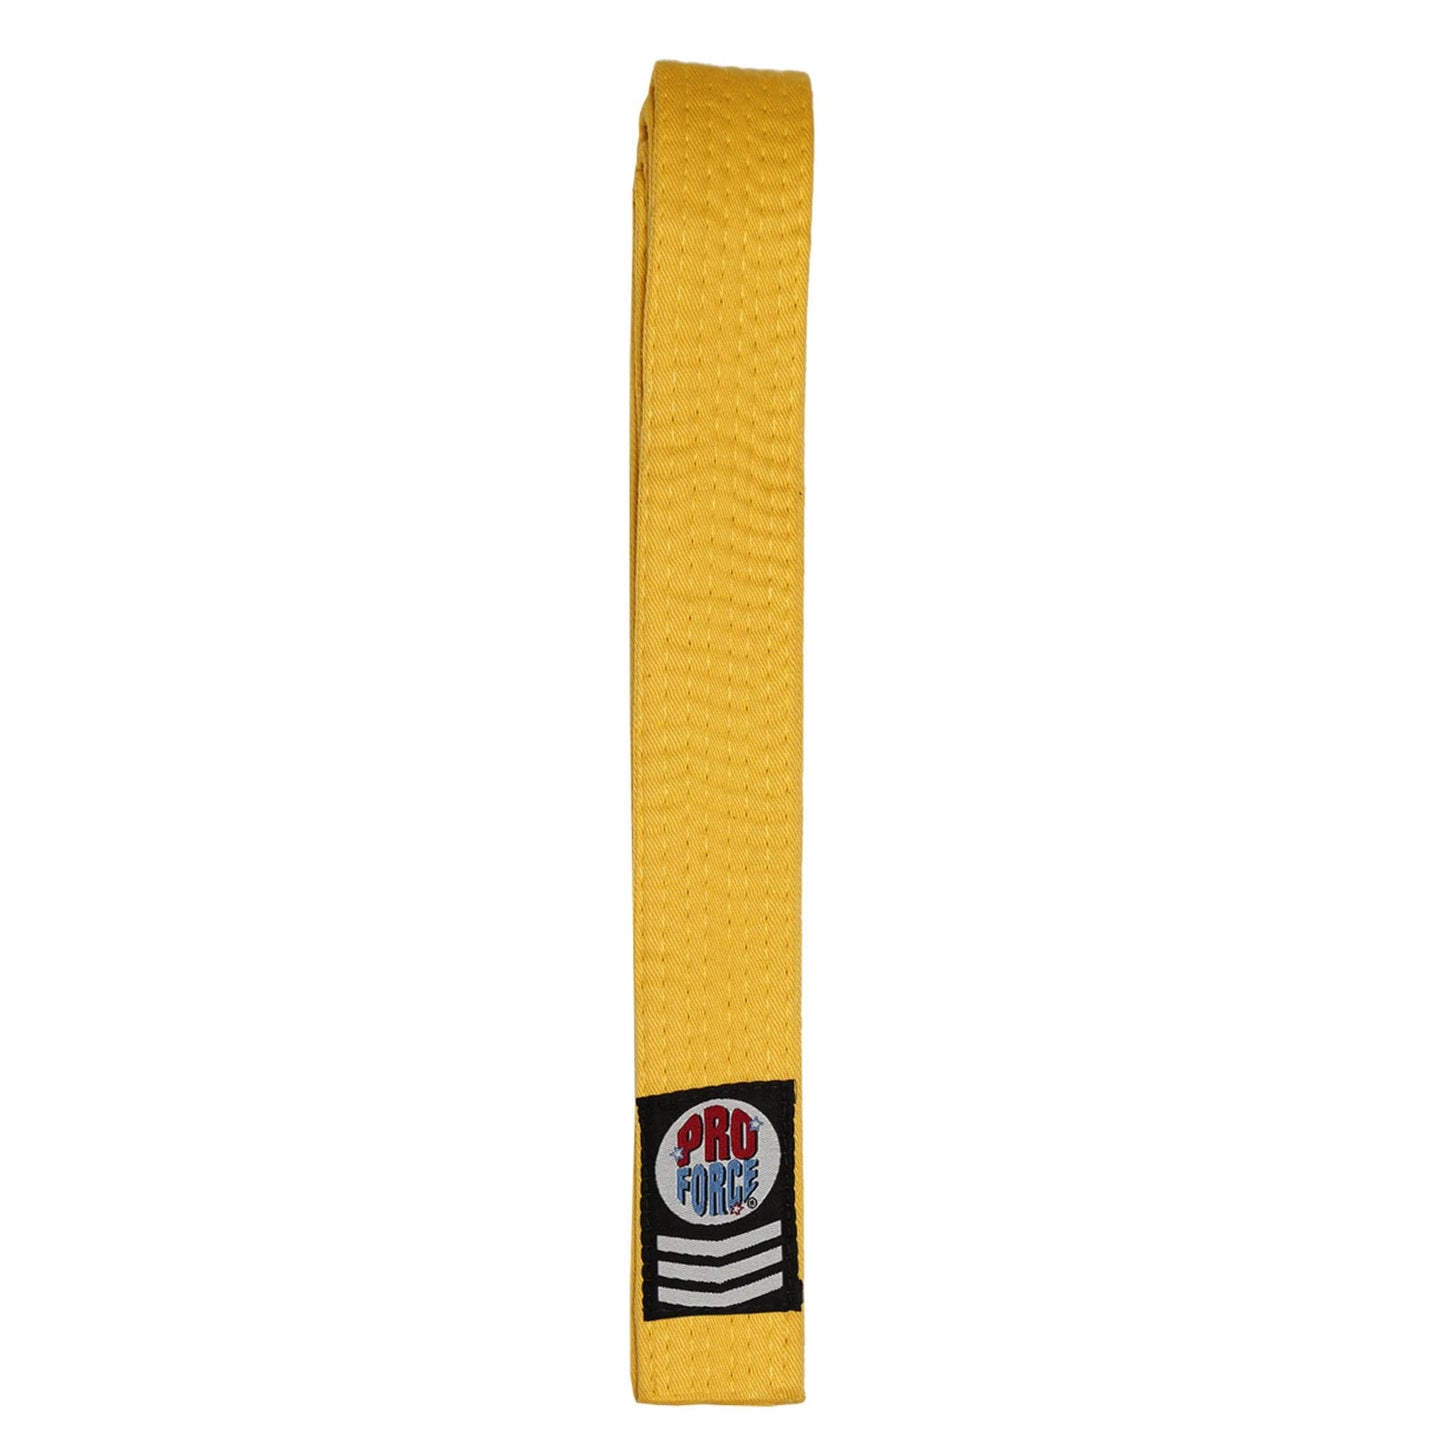 EclipseMartialArtsSupplies sporting goods Yellow / 0 child small ProForce II 1.5 inch Double Wrap Solid Karate Belts